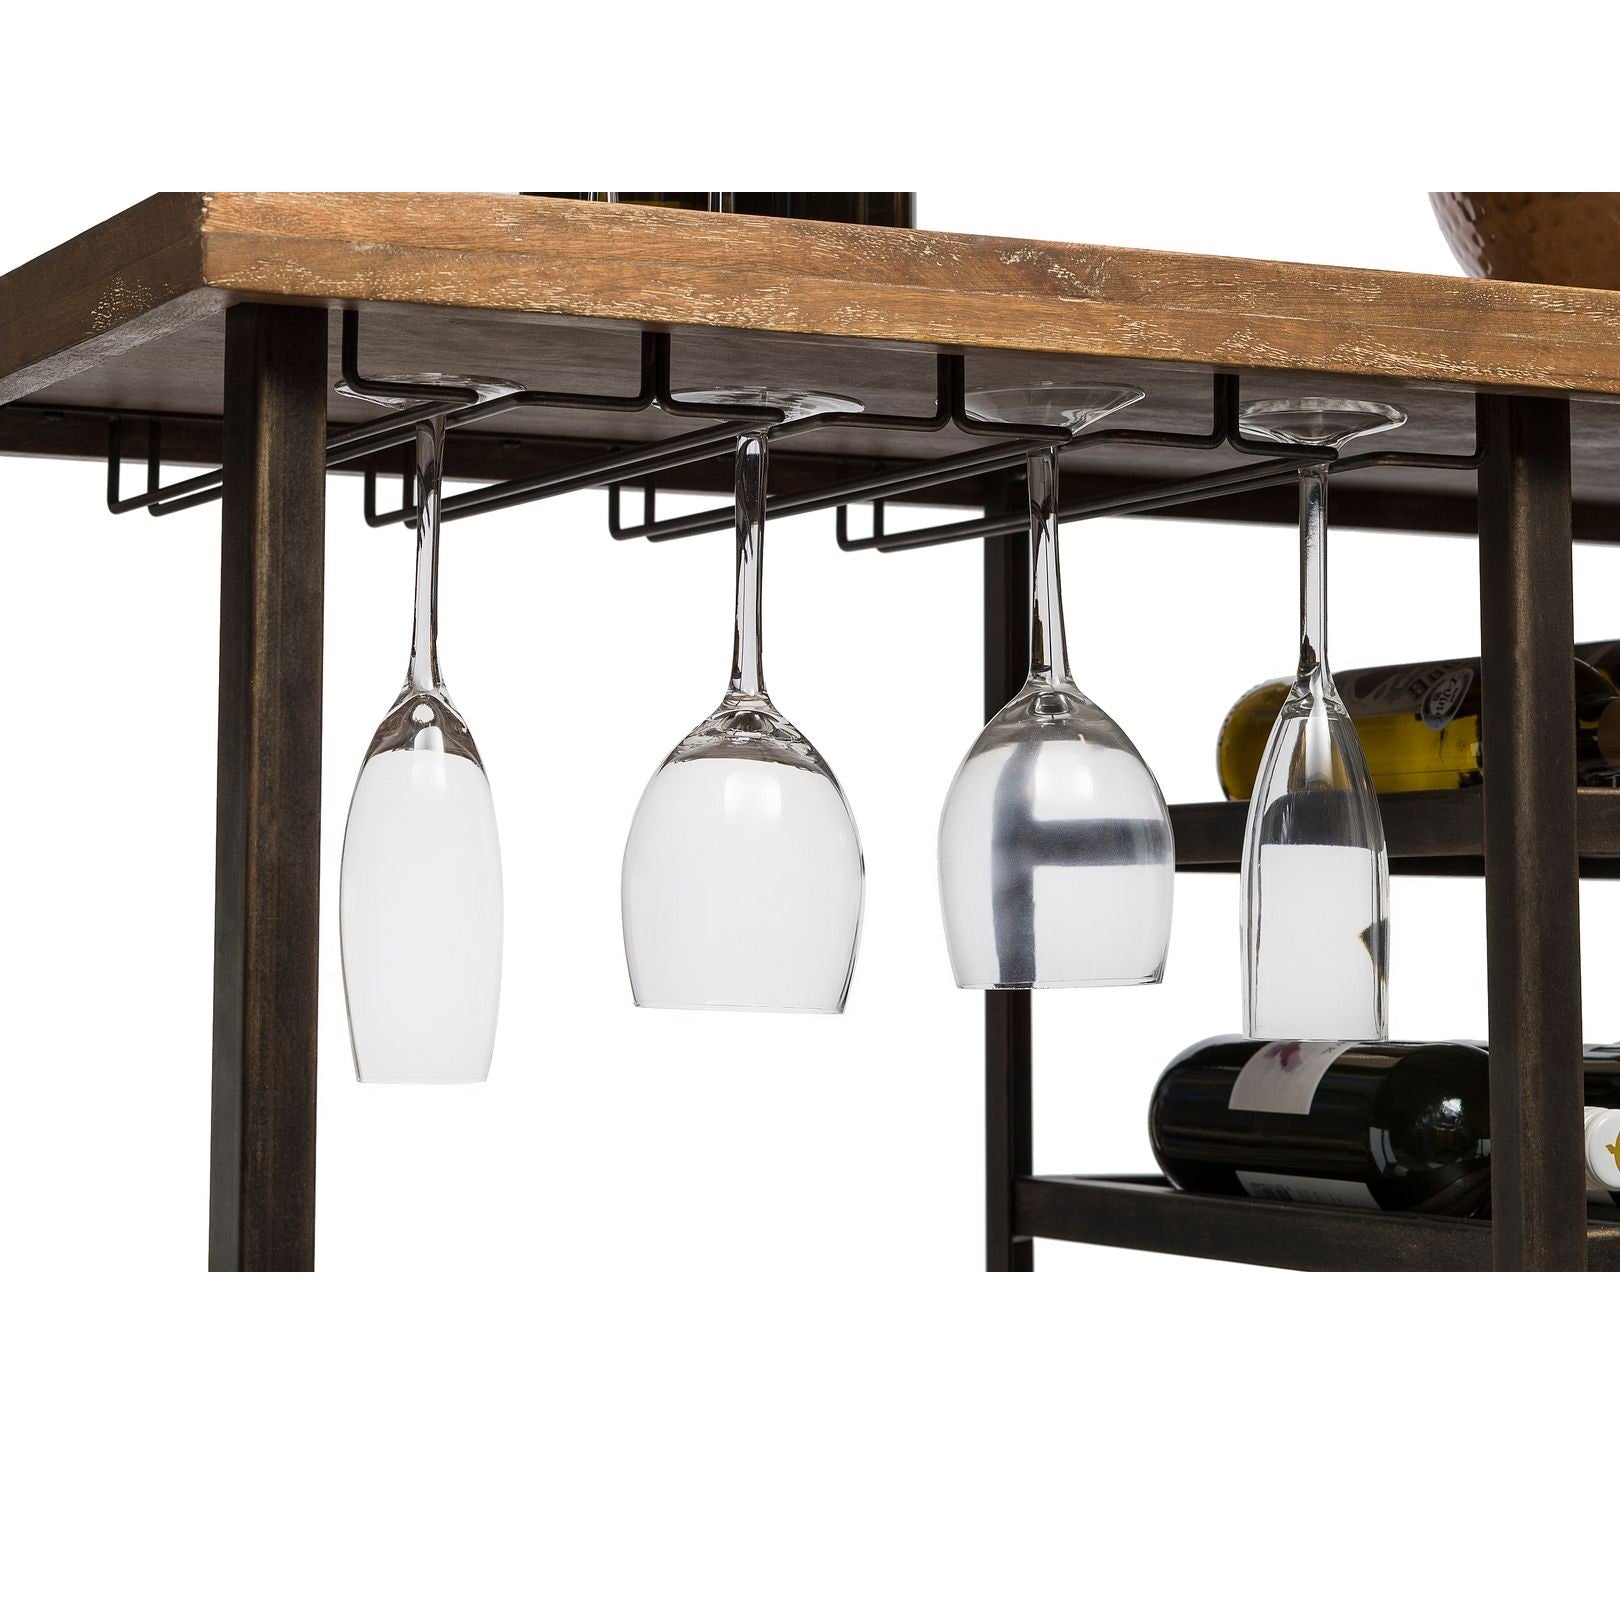 Wooden Bar Cart with Wine Bottle Rack - Rustic Finish - Notbrand